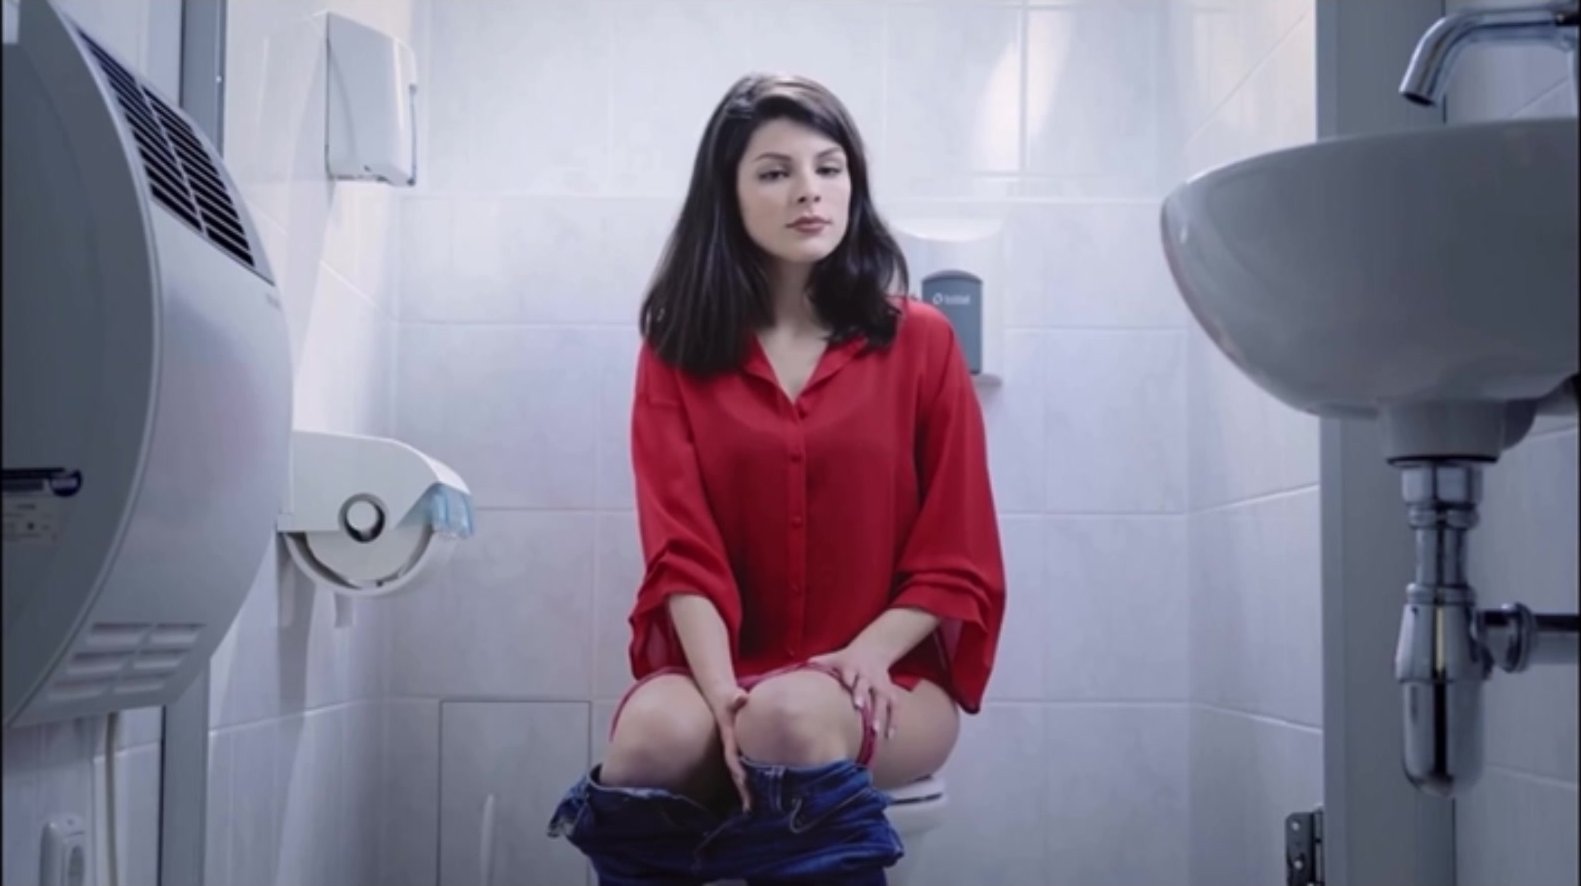 Beautiful girl struggling on the toilet